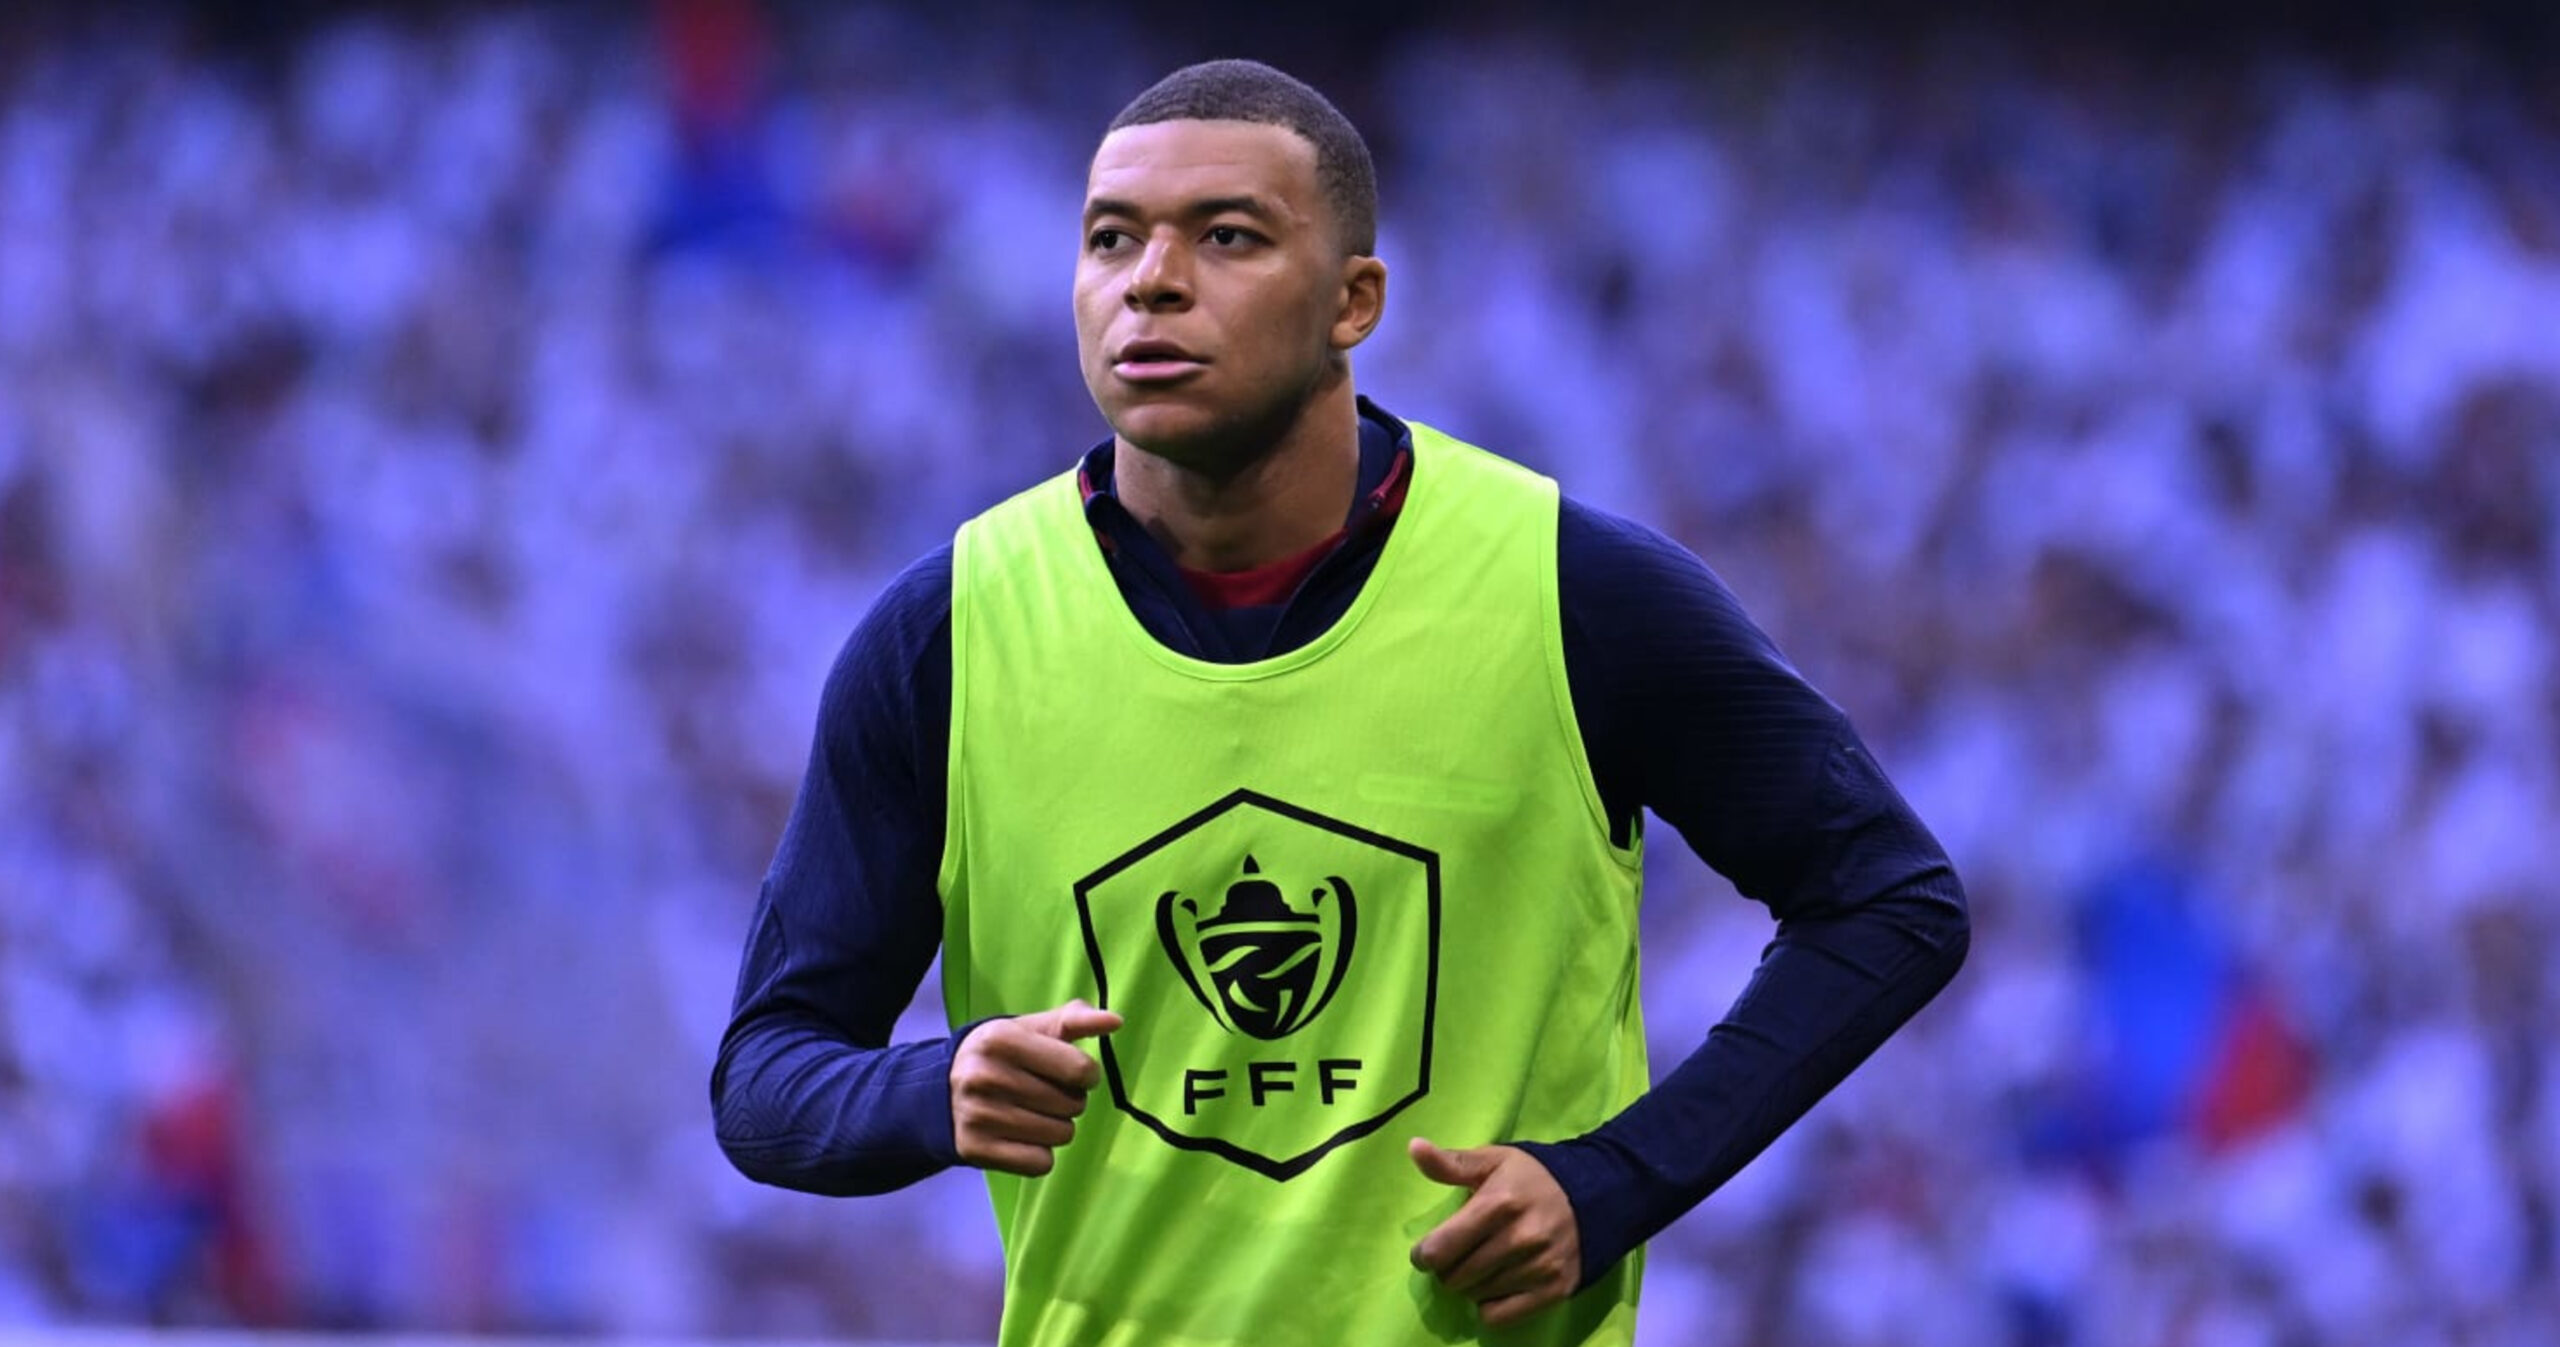 Kylian Mbappé to Announce Next Team in a ‘Few Days’ amid Real Madrid Rumors, PSG Exit